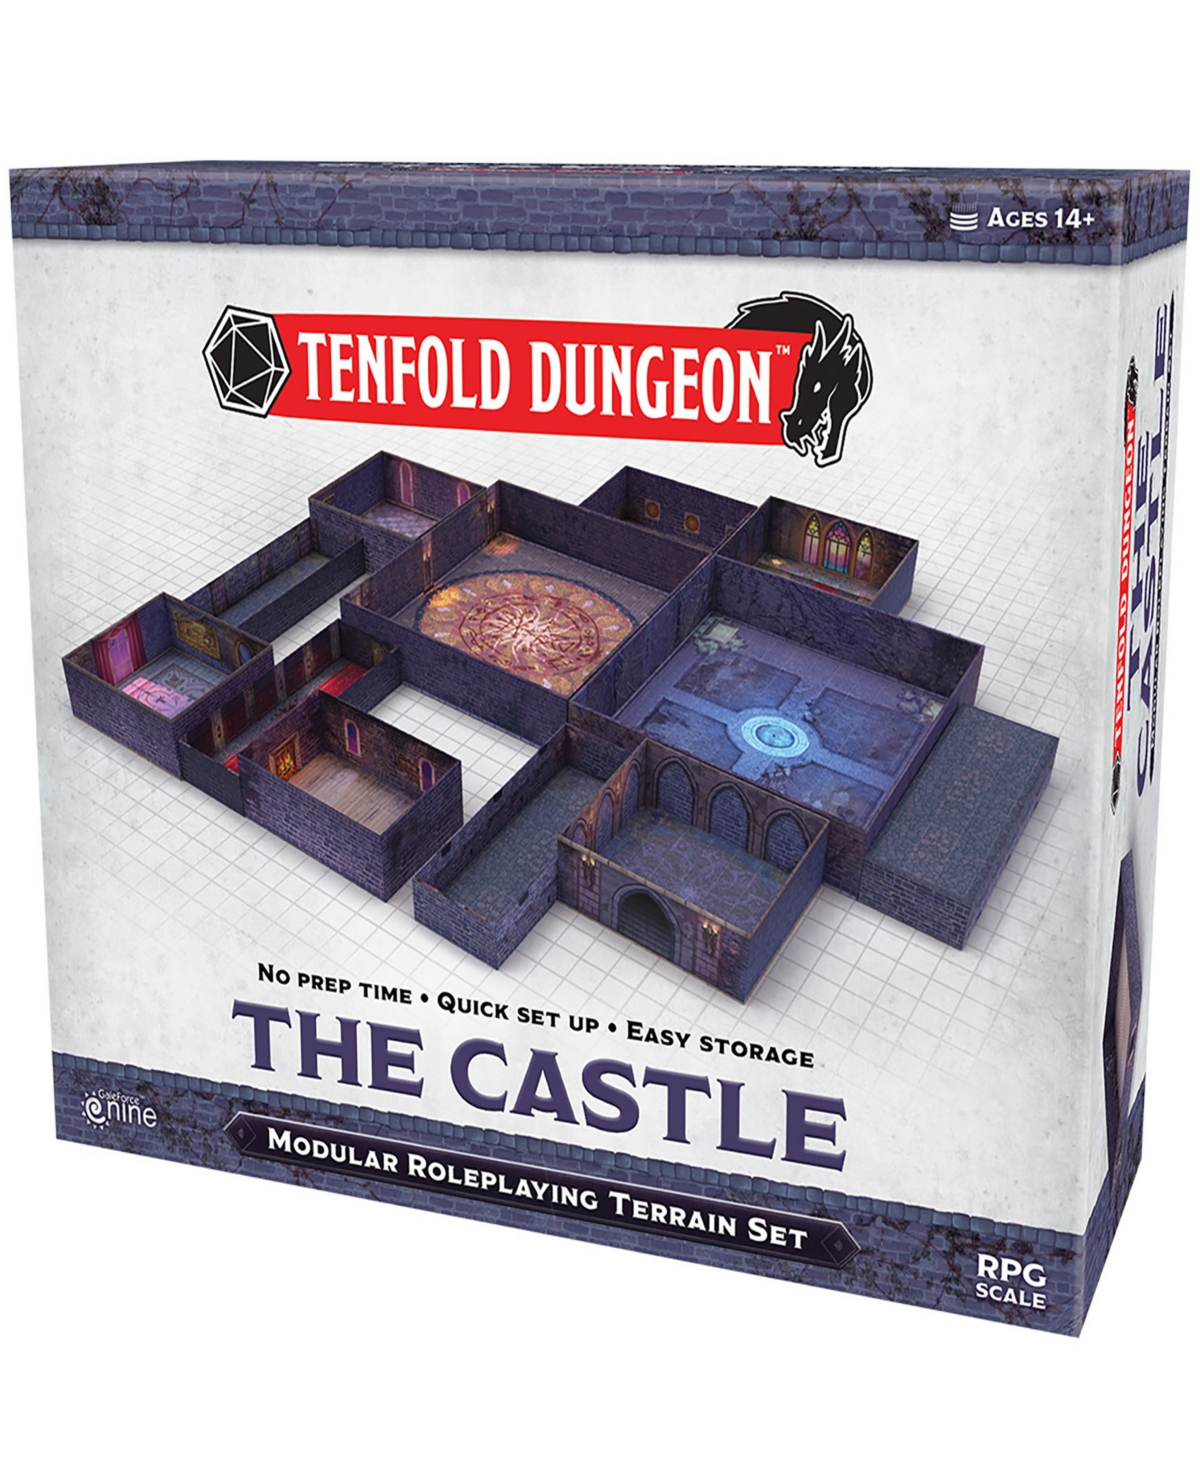 Gale Force Nine Tenfold Dungeons The Castle Modular Roleplaying Terrain 5 Piece Set 5e Role Playing Game Adventure G In Multi